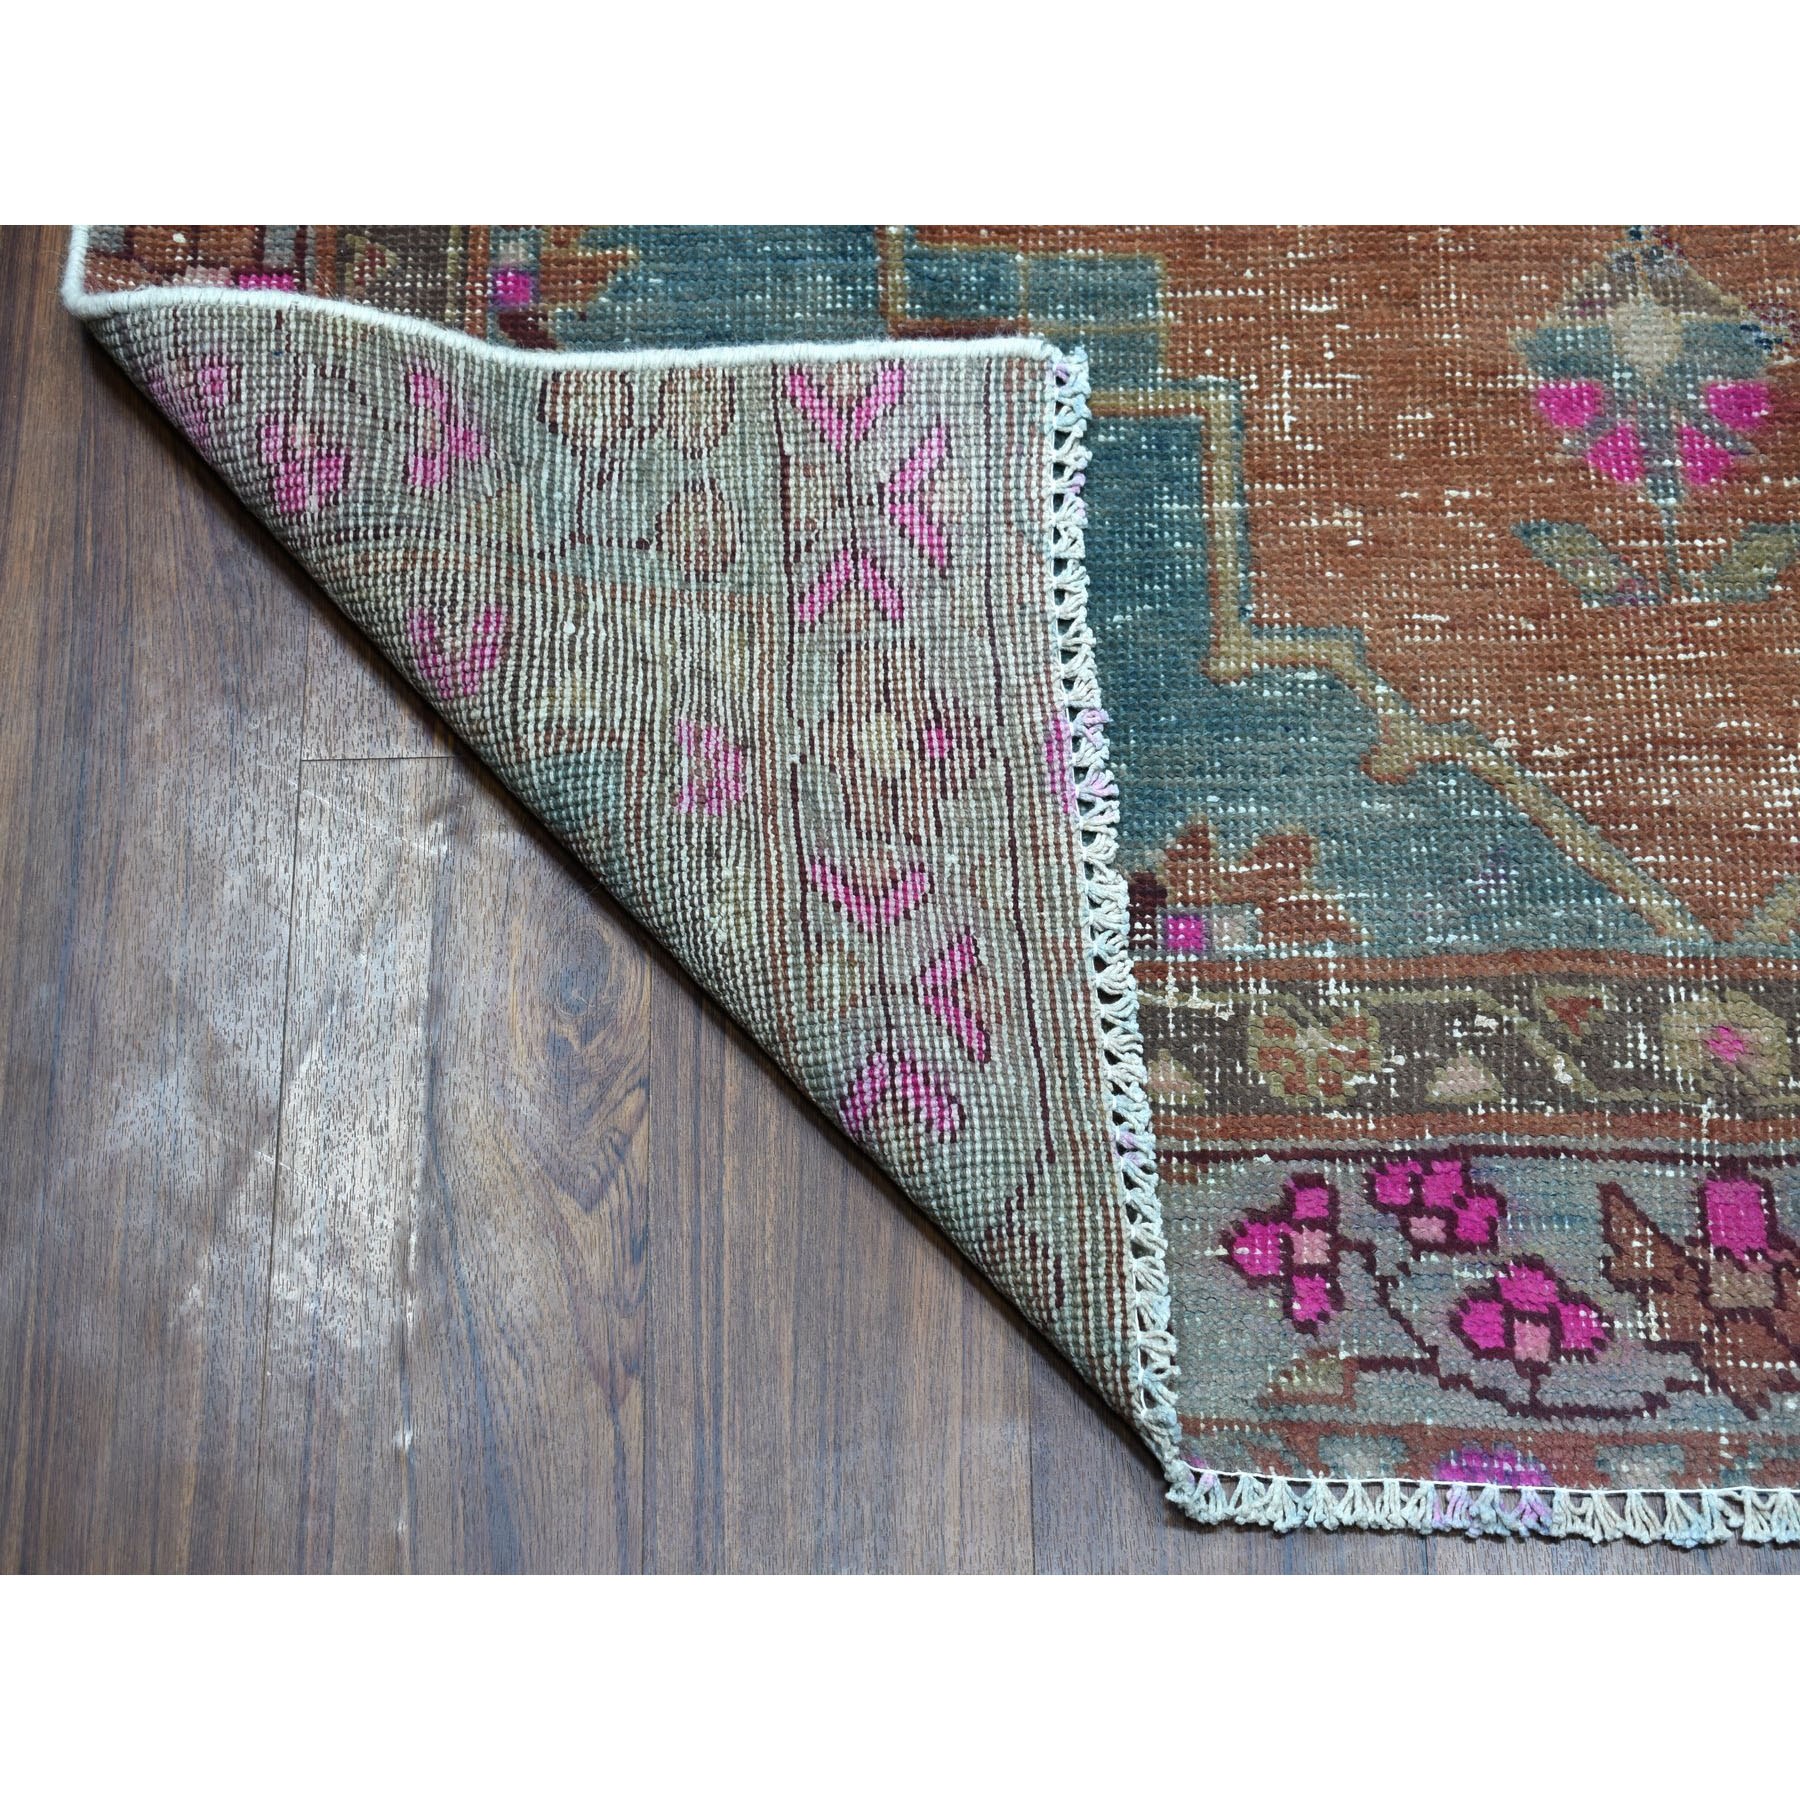 4-6 x9- Vintage And Worn Down Wide Runner Persian Qashqai Hand Knotted Bohemian Rug 